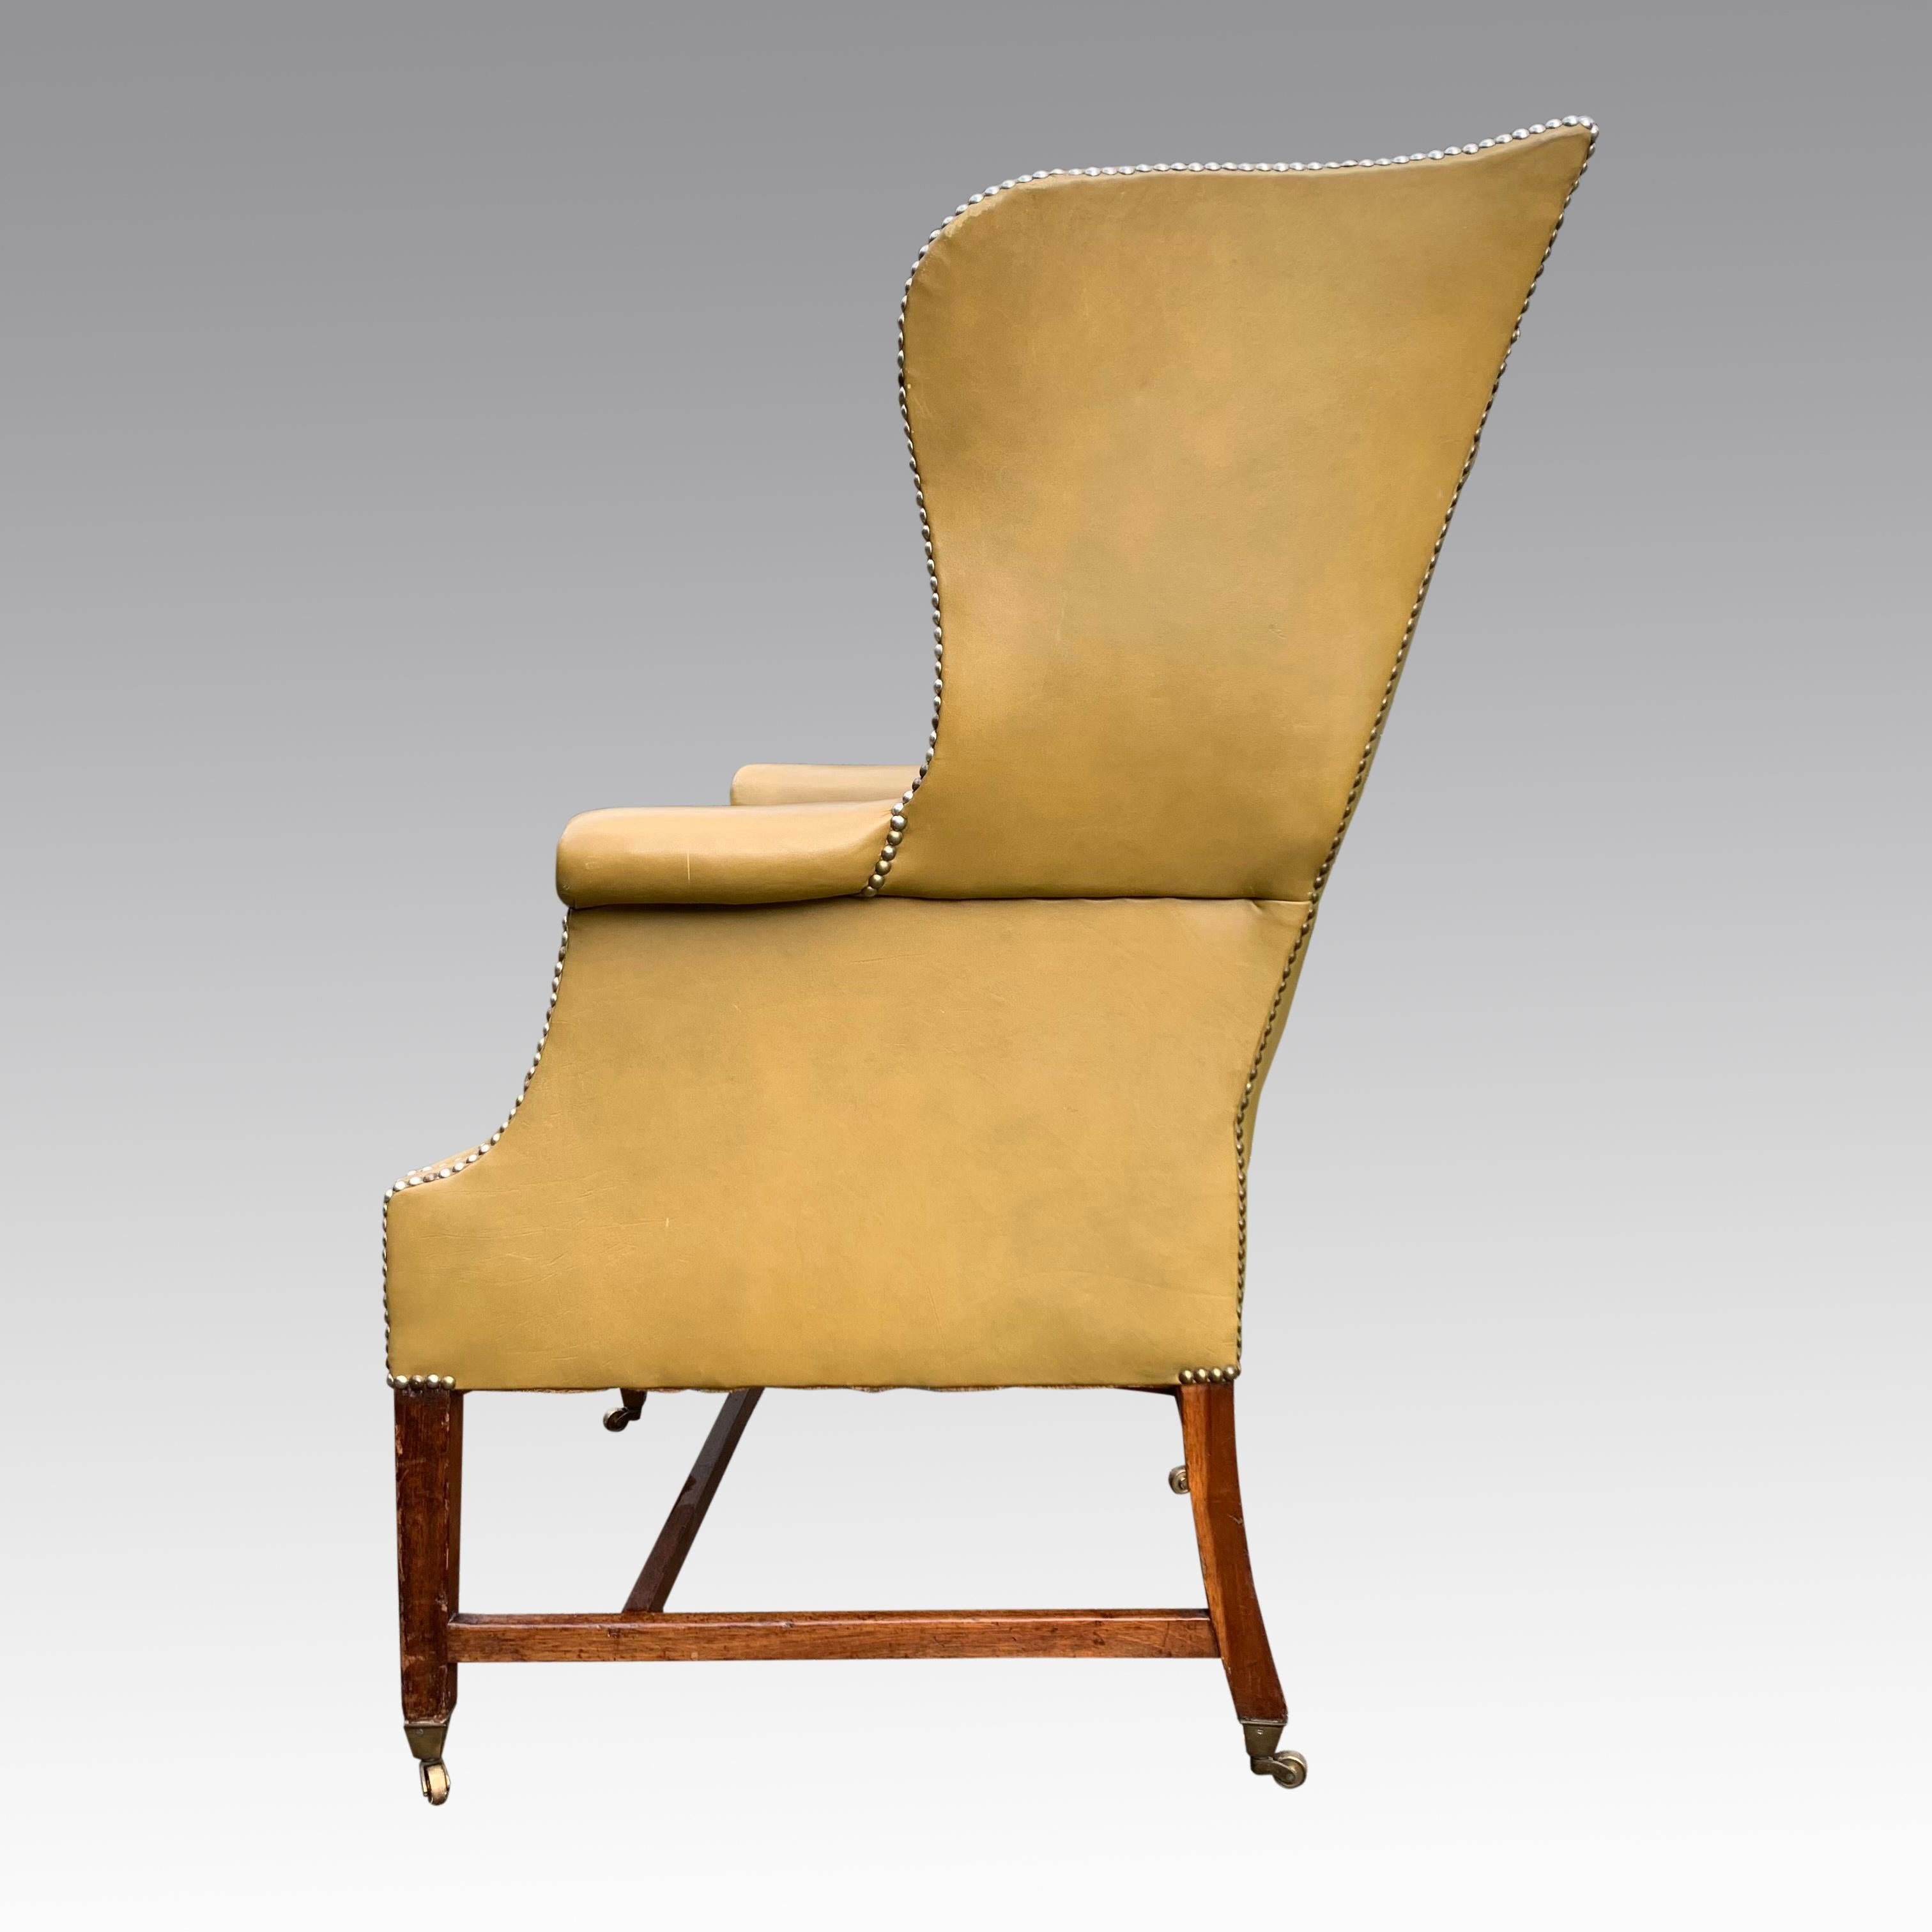 A good George III period mahognay wing armchair covered in a pale green leather which is nicely aged and mellowed. The chair of classical shape with pleasing design, standing on square tapering legs with brass cups and castors and 'H' stretchers